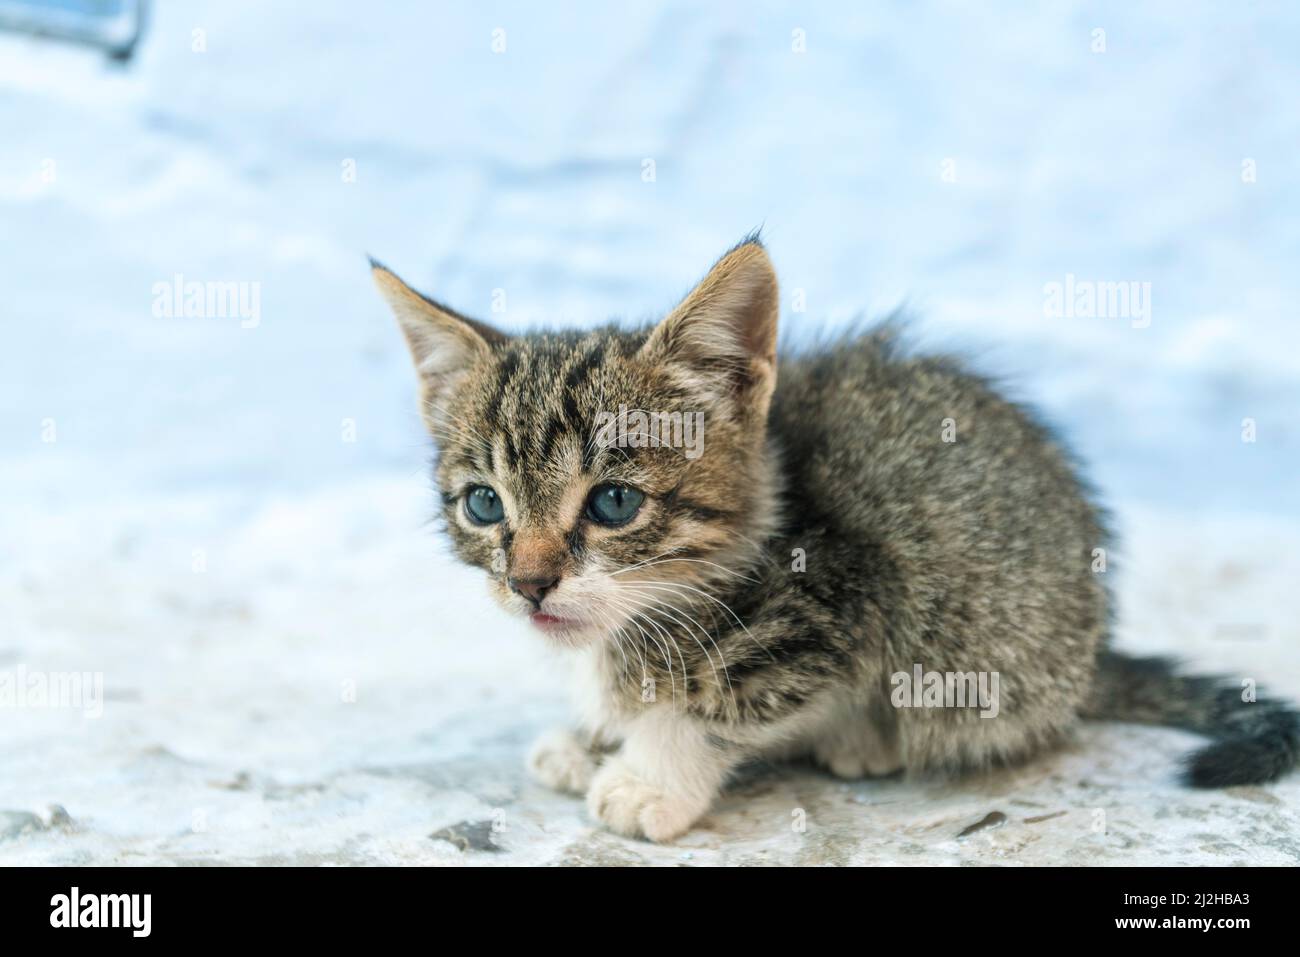 Morocco, Chefchaouen, Kitten on wall Stock Photo